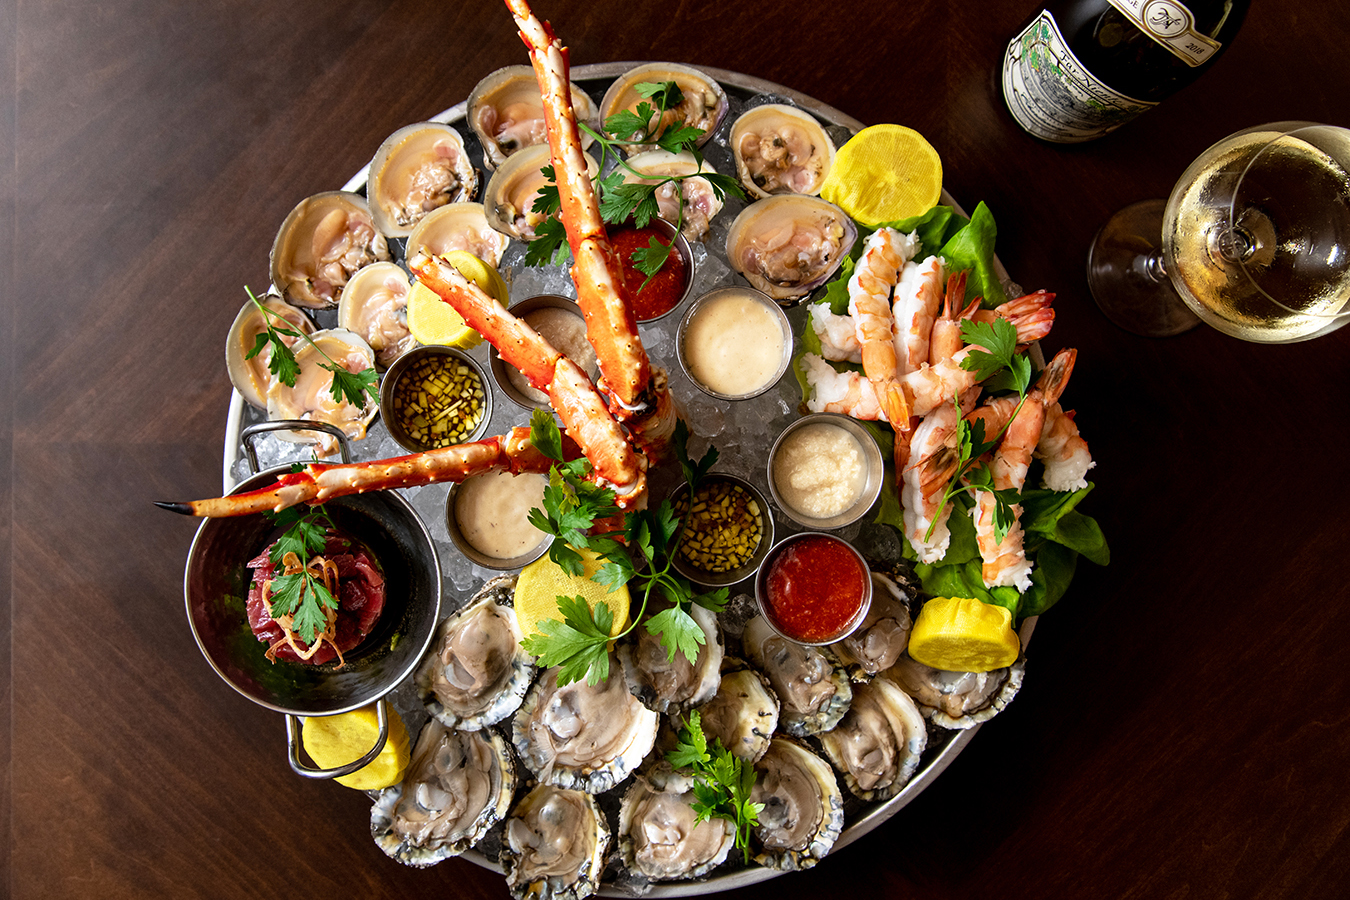 Seafood Tower from C&S Seafood.